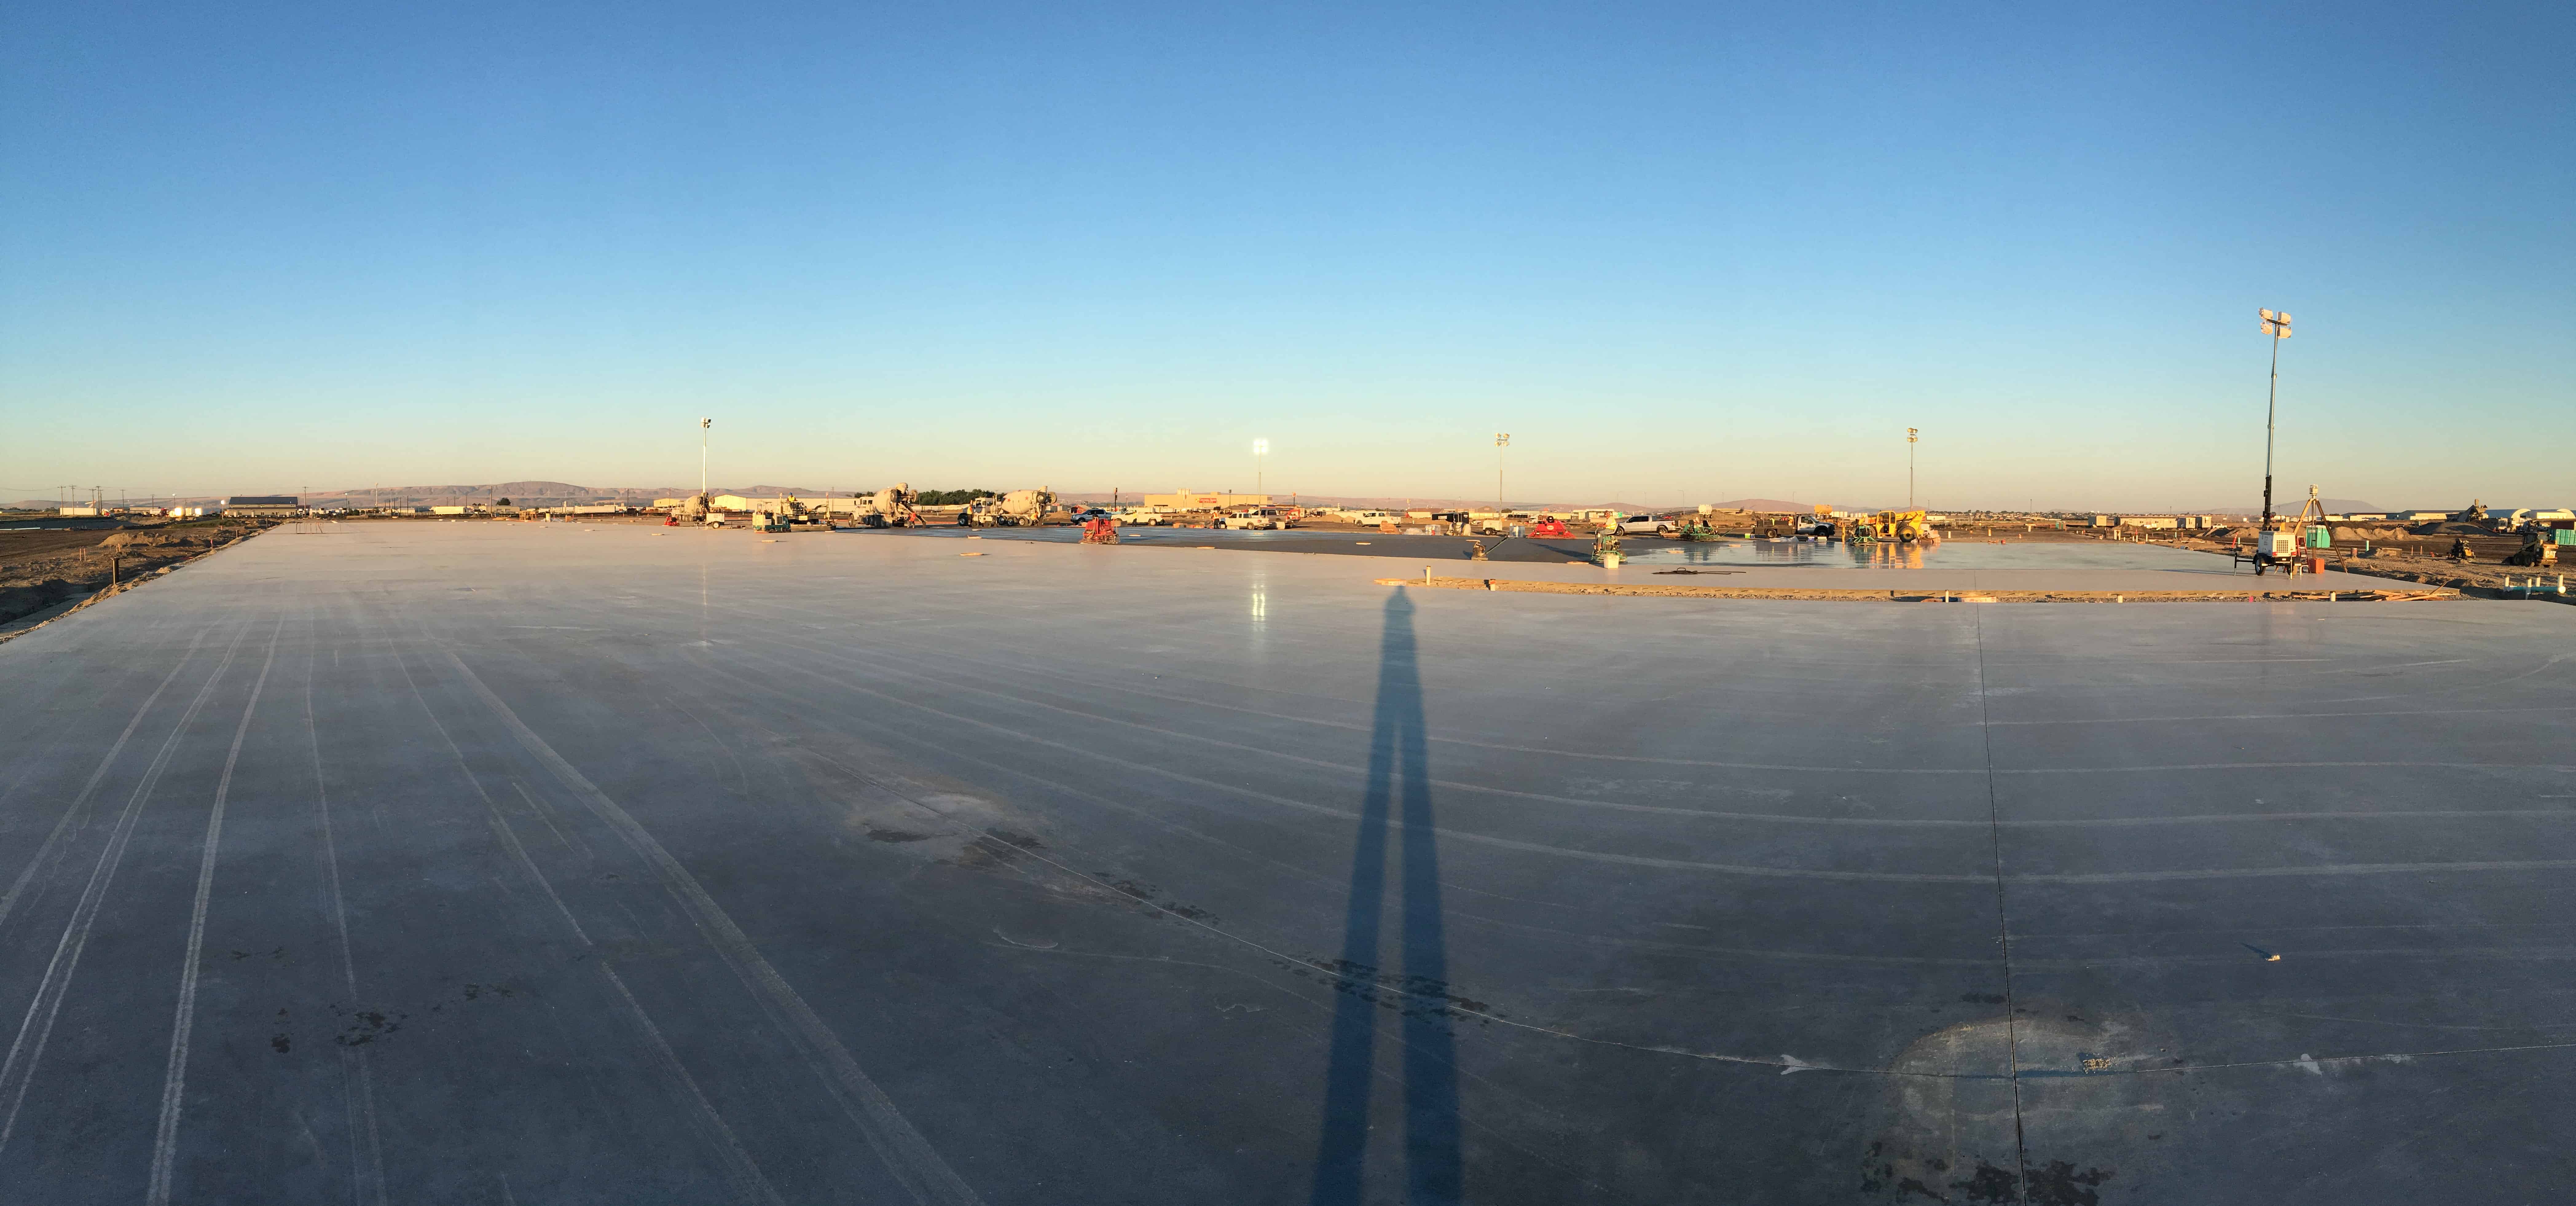 Panoramic view of Ductilcrete concrete slab flatwork project